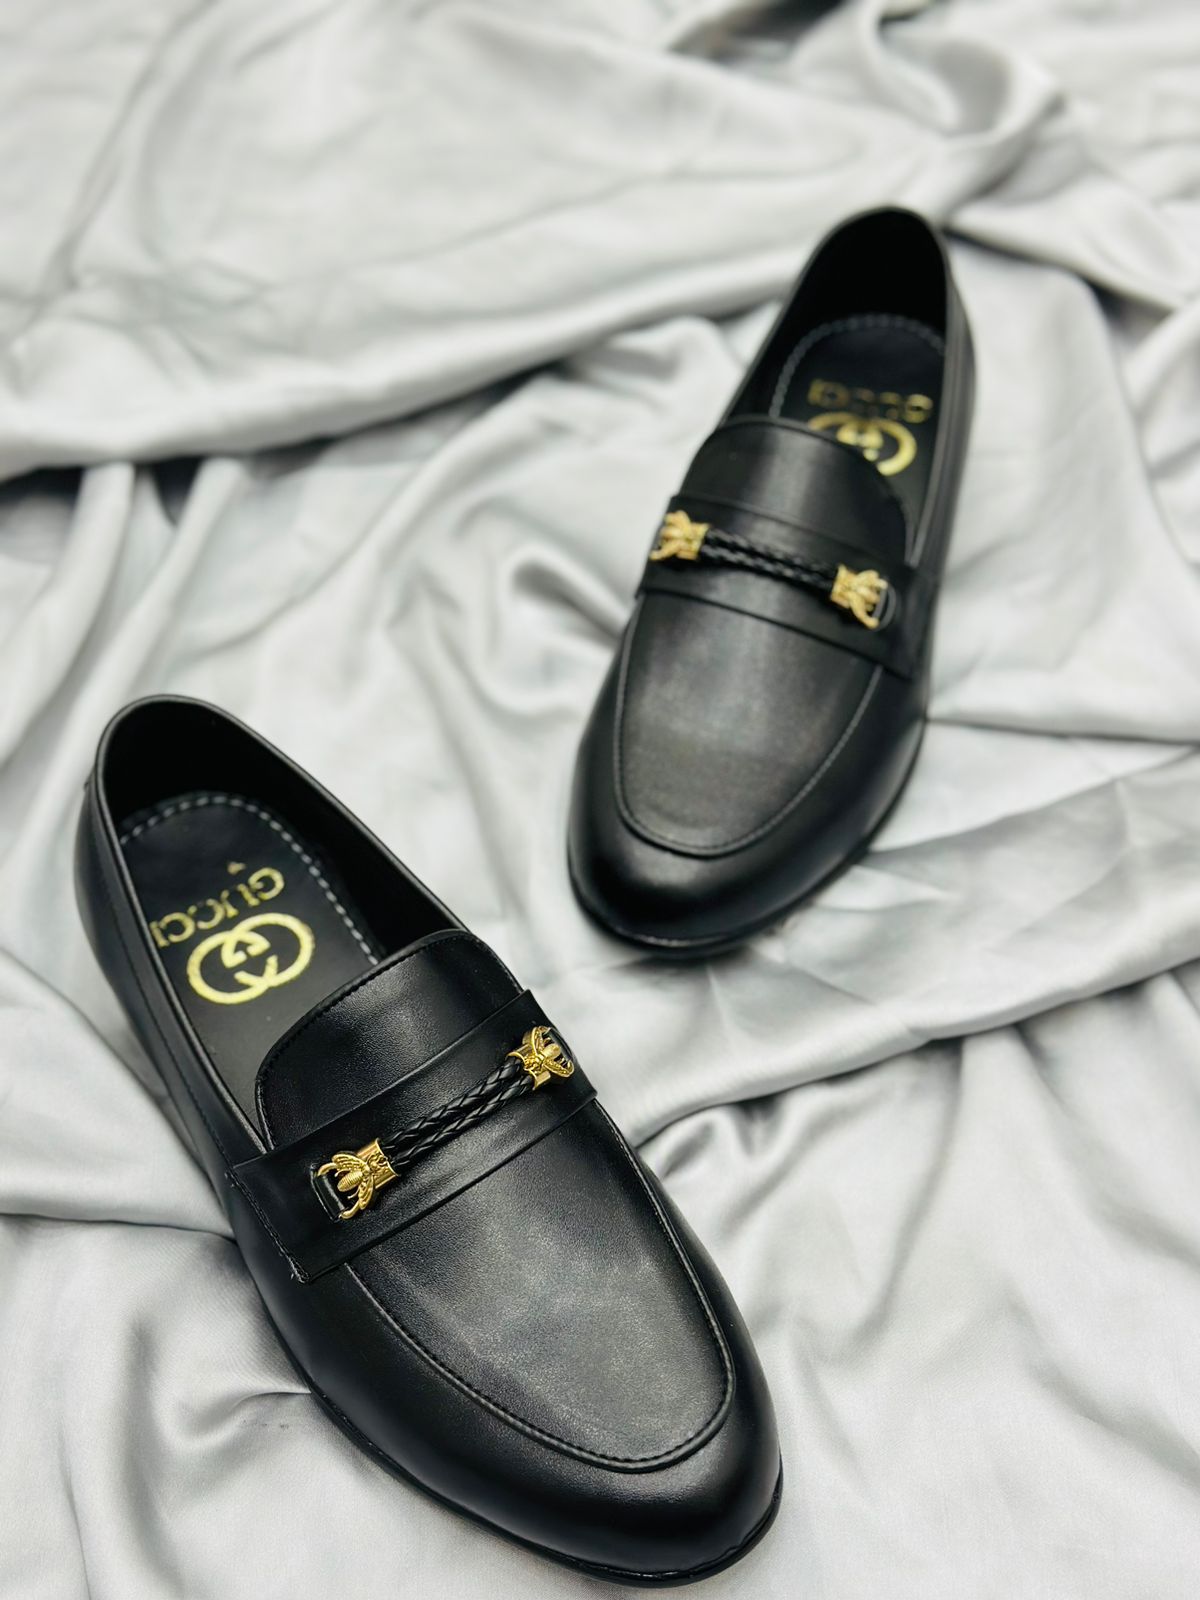 20% OFF Formal Gucci Shoes In Pakistan | Gucci Shoes Prices In Pakistan